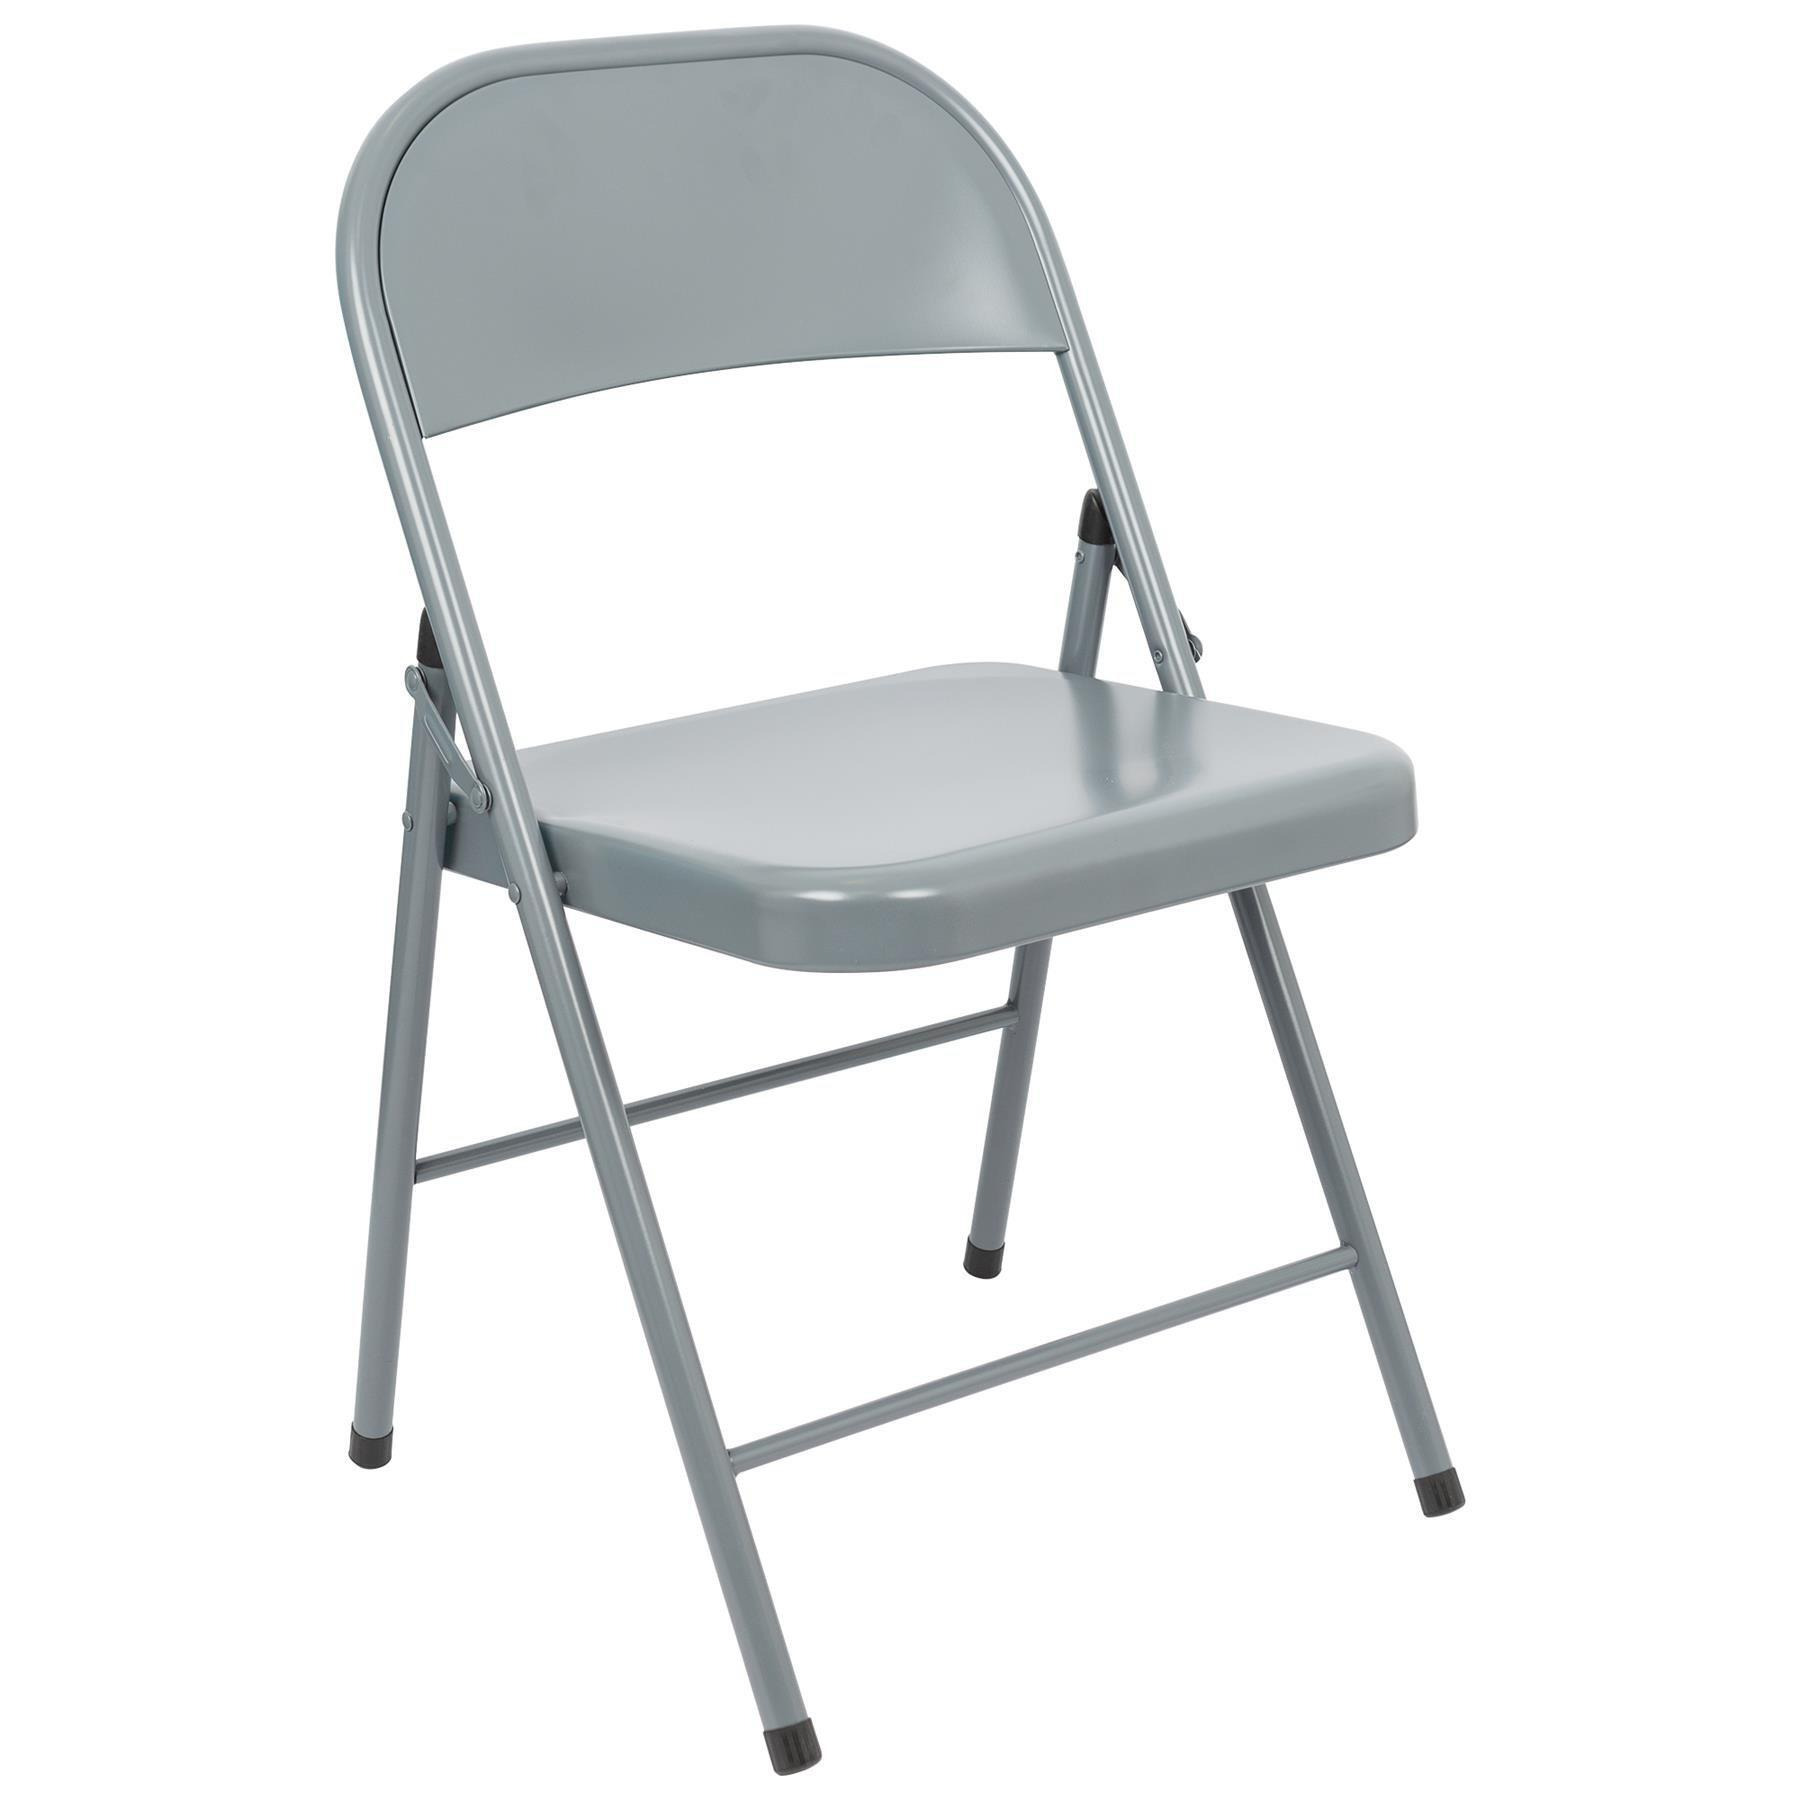 Metal Folding Chair - Pack of 1 - image 1